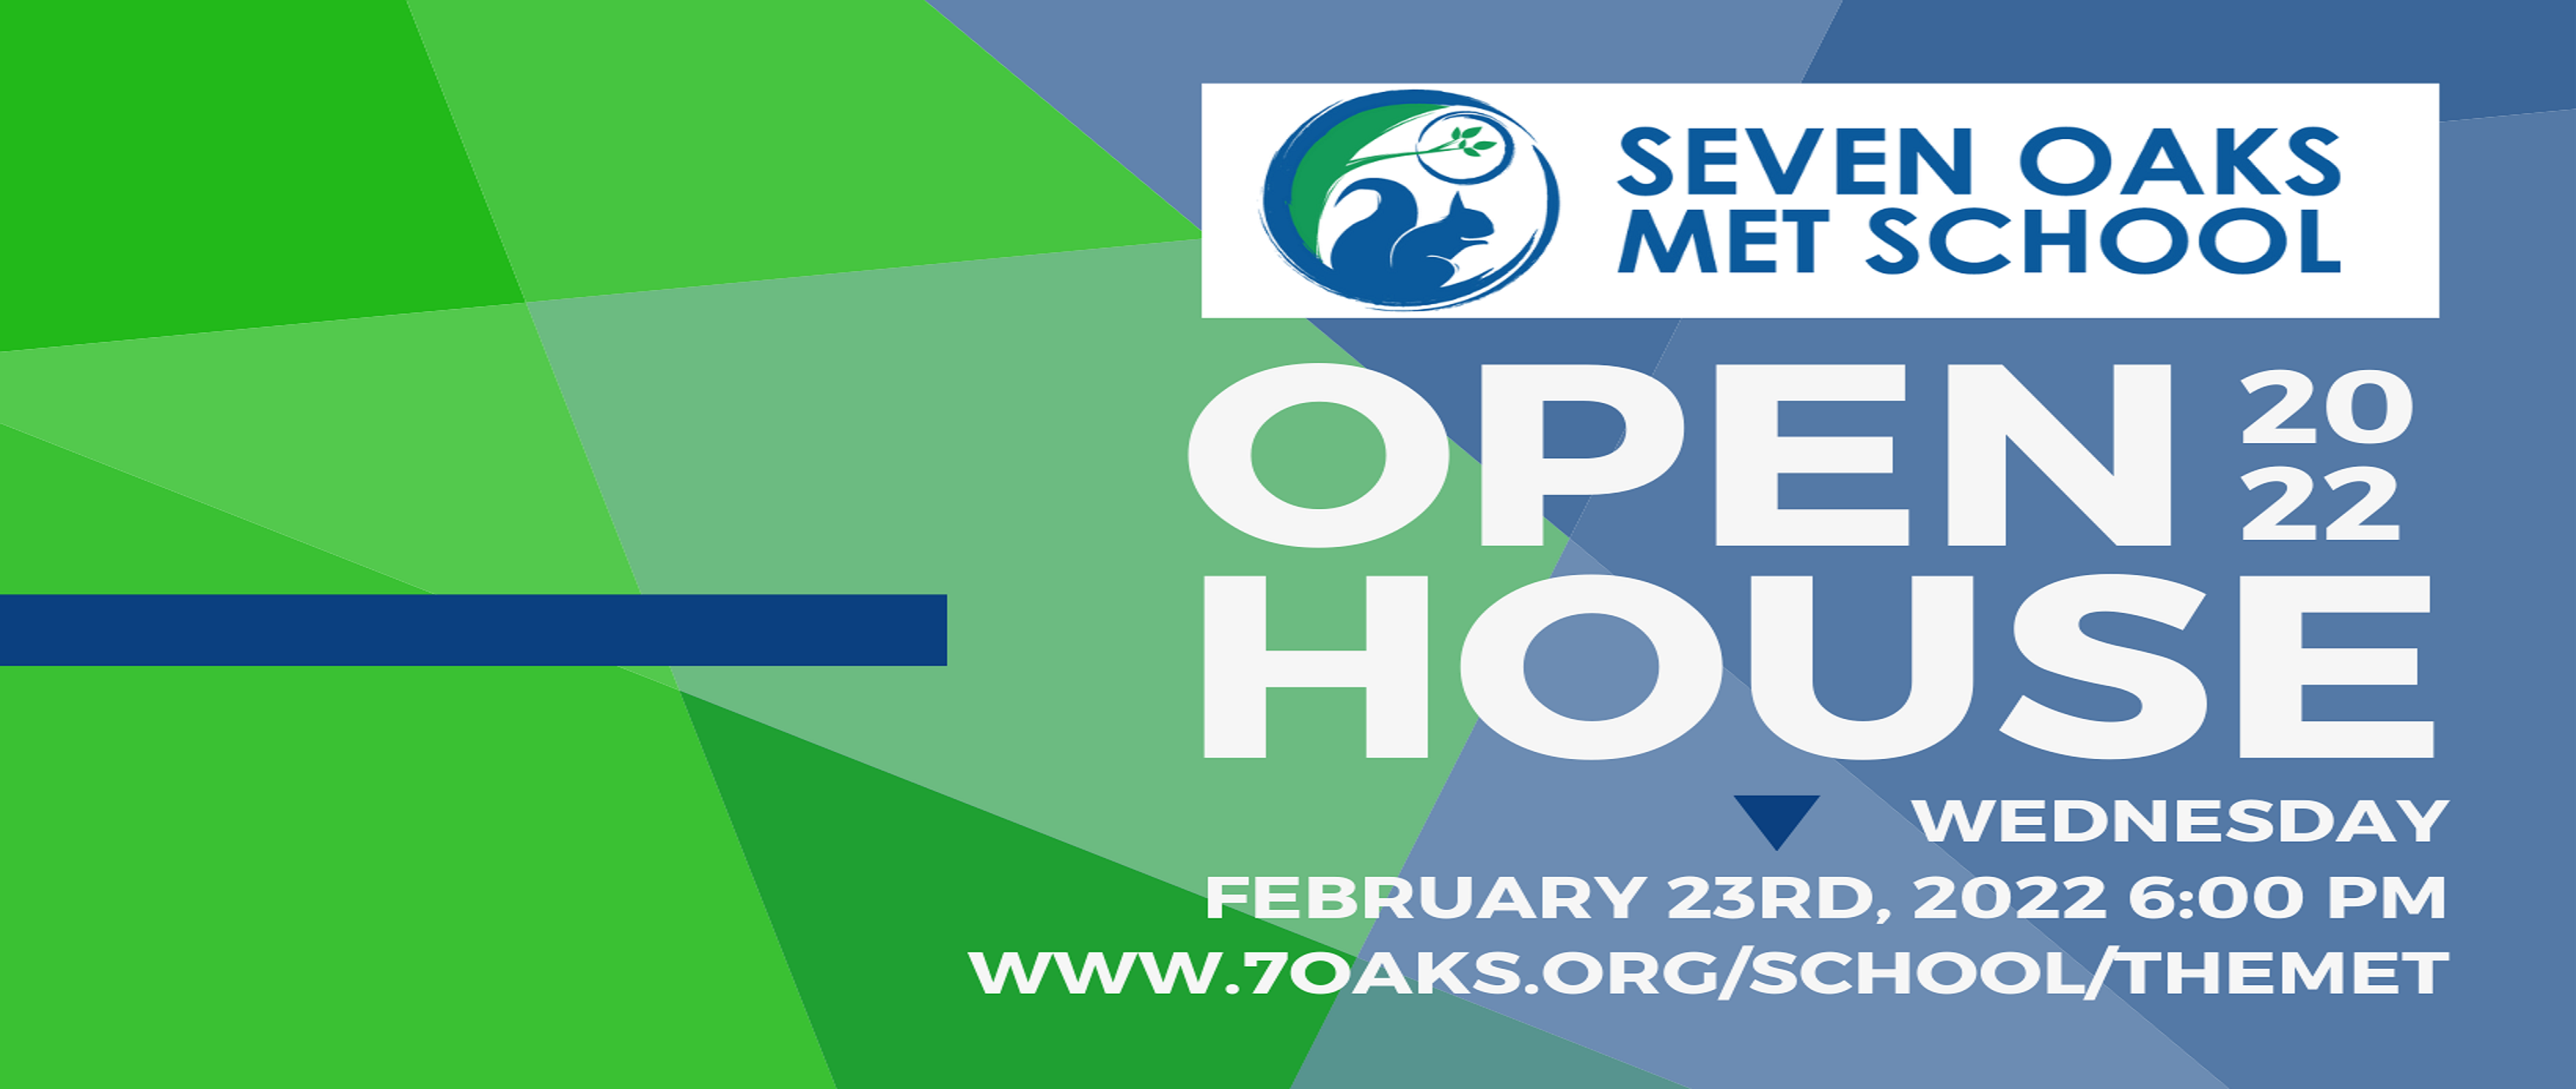 Open House Ad FB Banner 2022.png